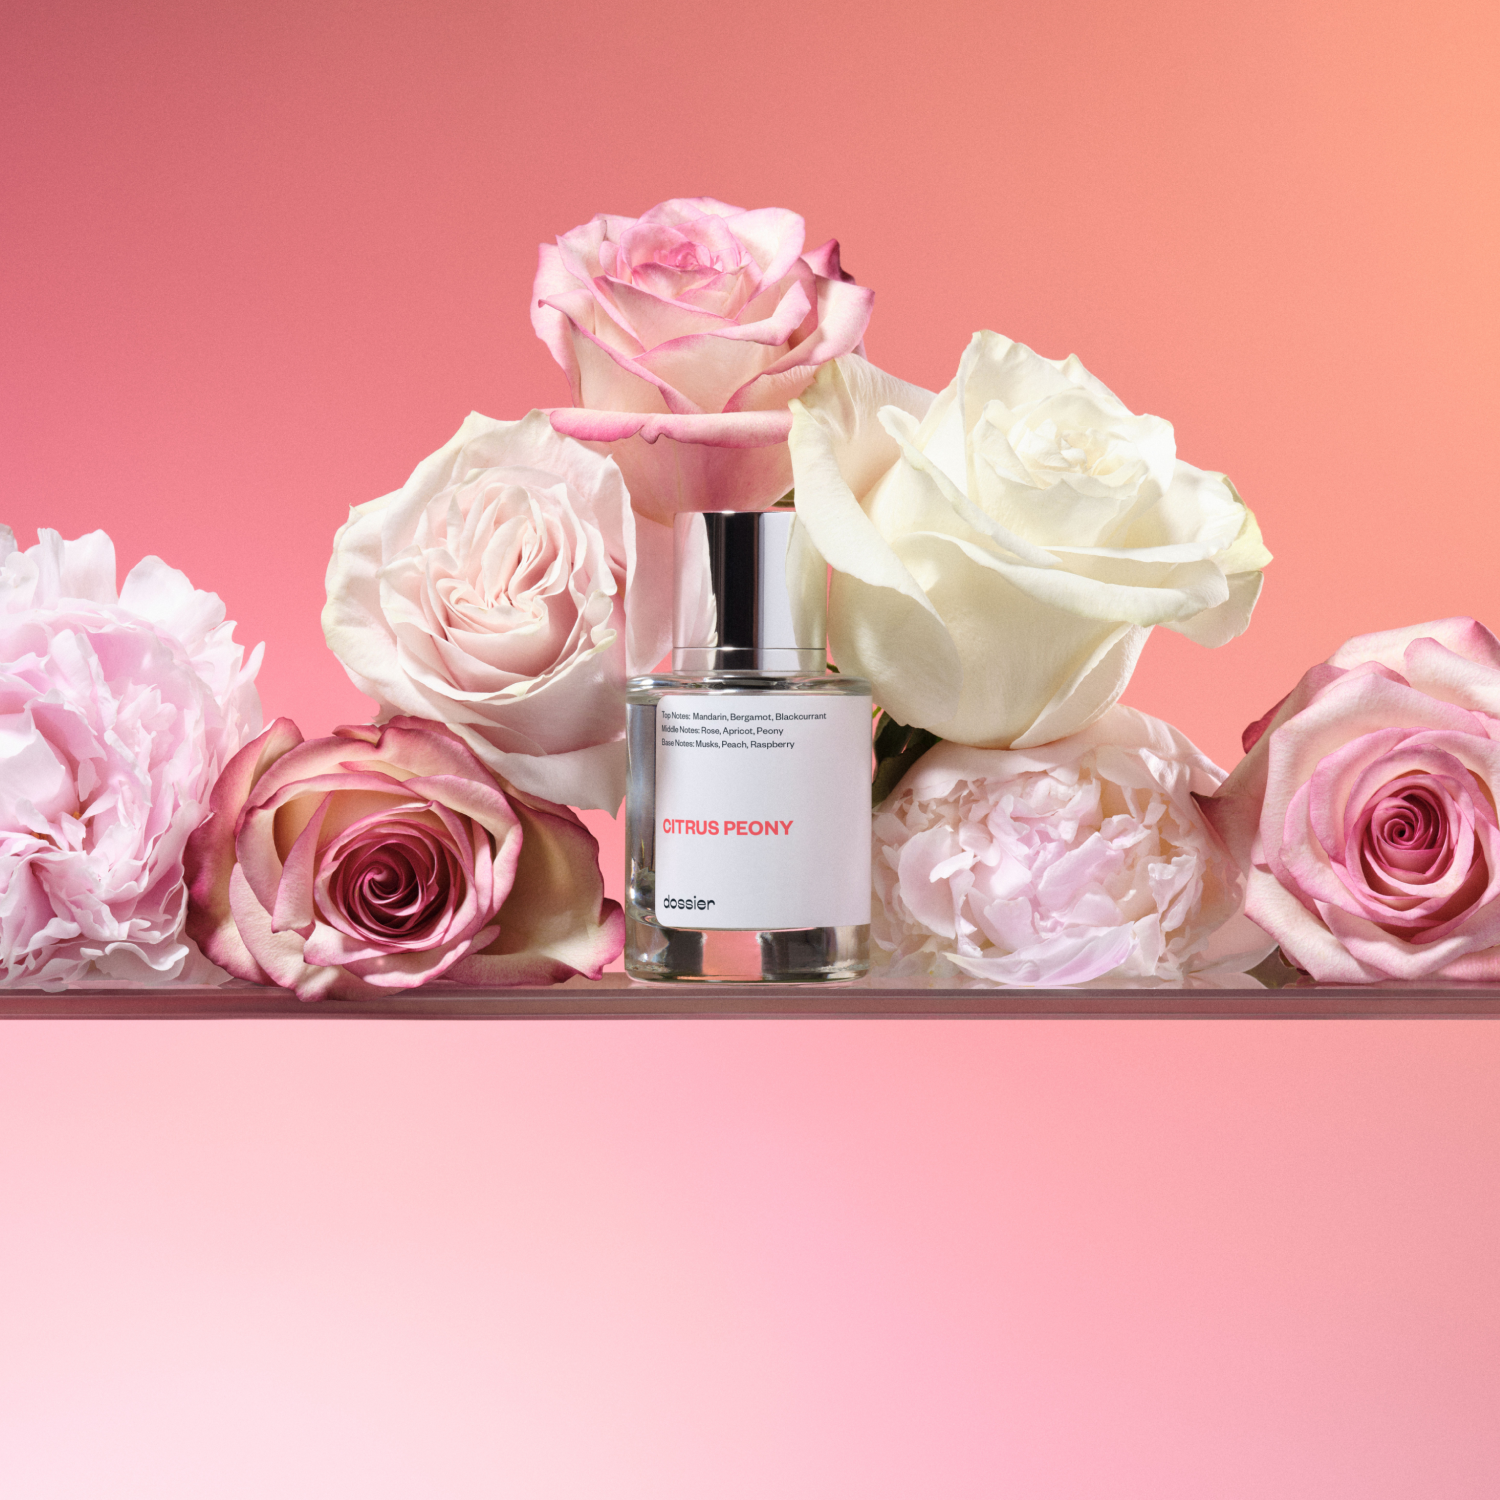 Miss Dior Blooming Bouquet Dupe Perfume: Citrus Peony - Dossier Perfumes